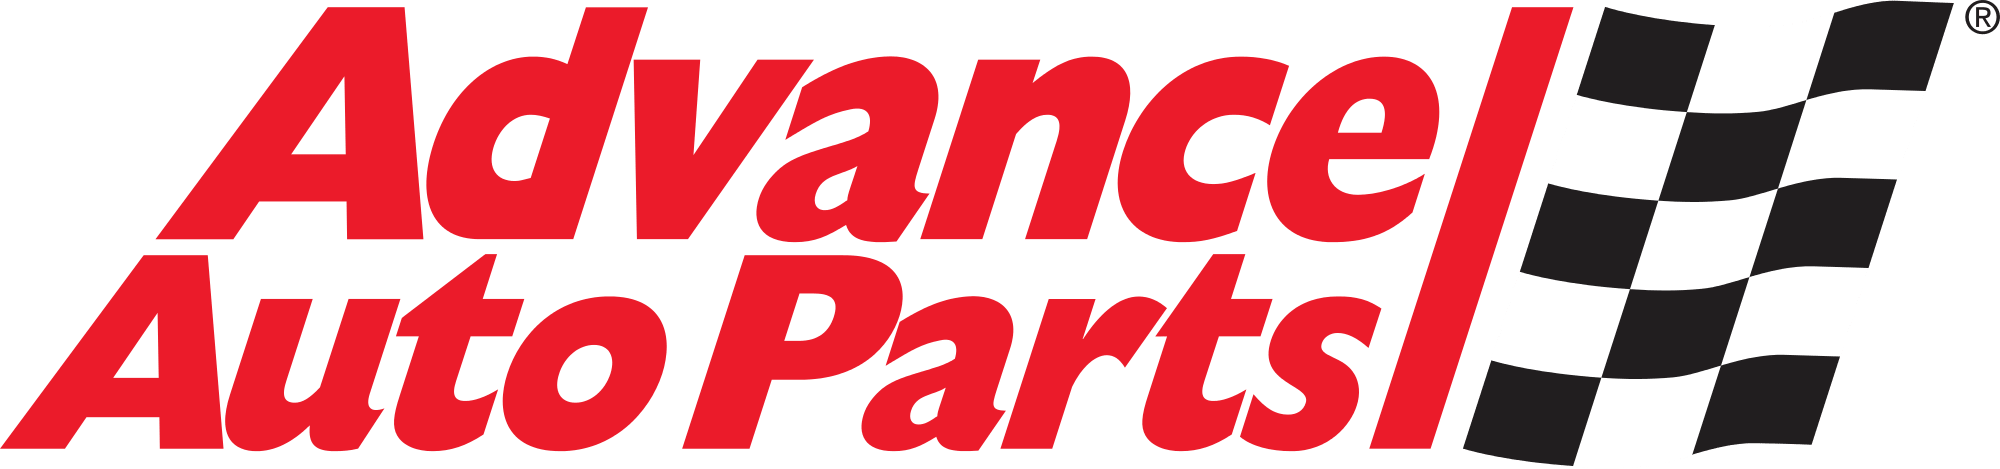 Advance Auto Parts logo, checkered flag, red block letters